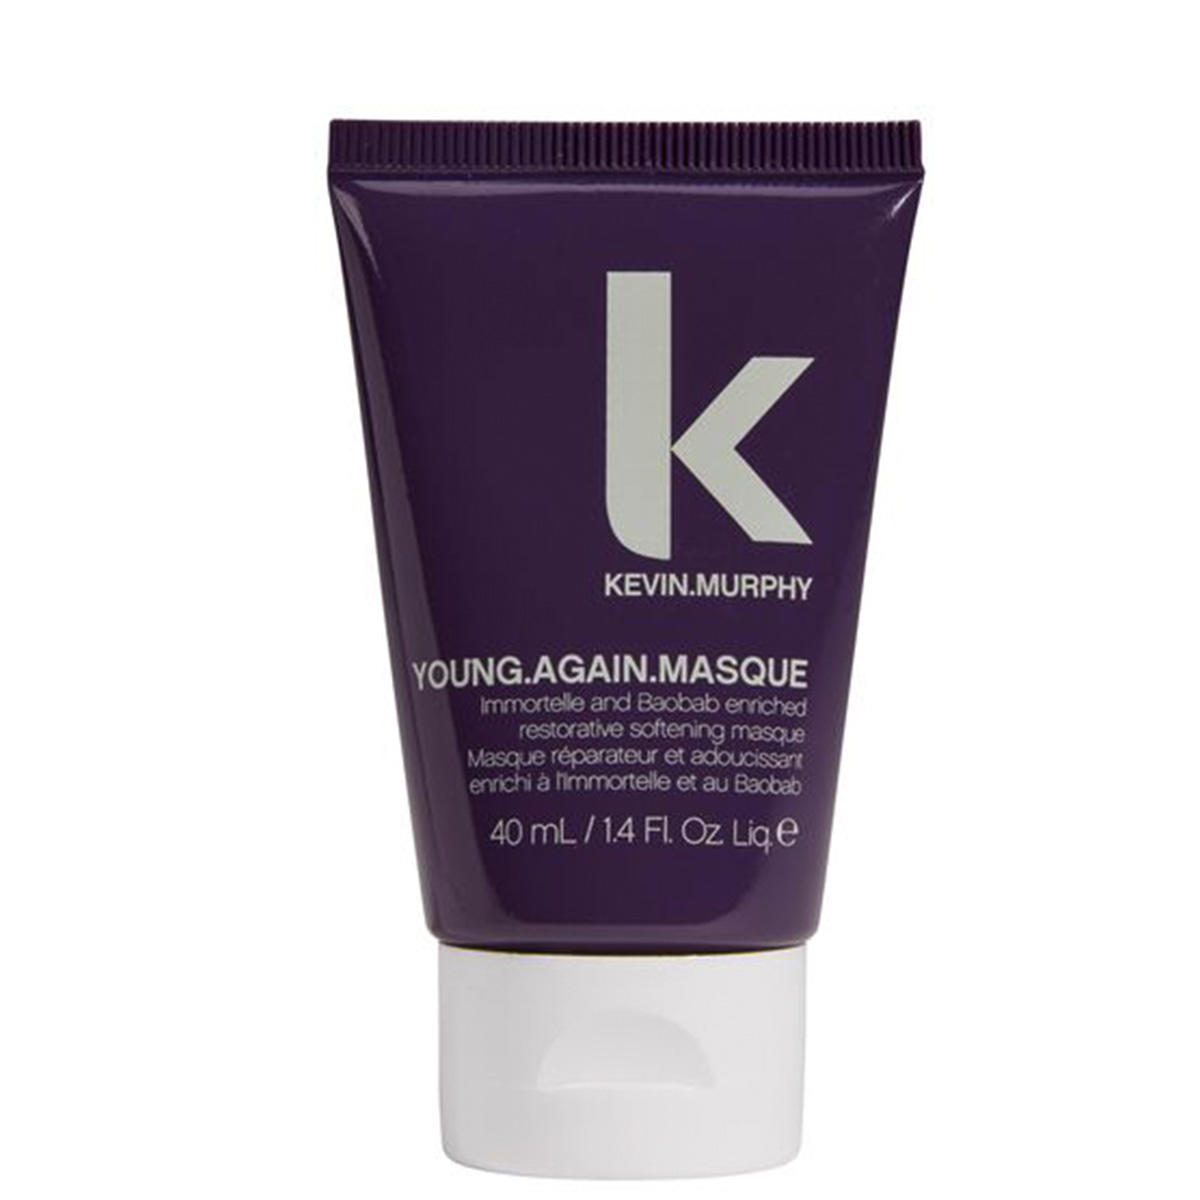 KEVIN.MURPHY YOUNG.AGAIN Masque 40 ml